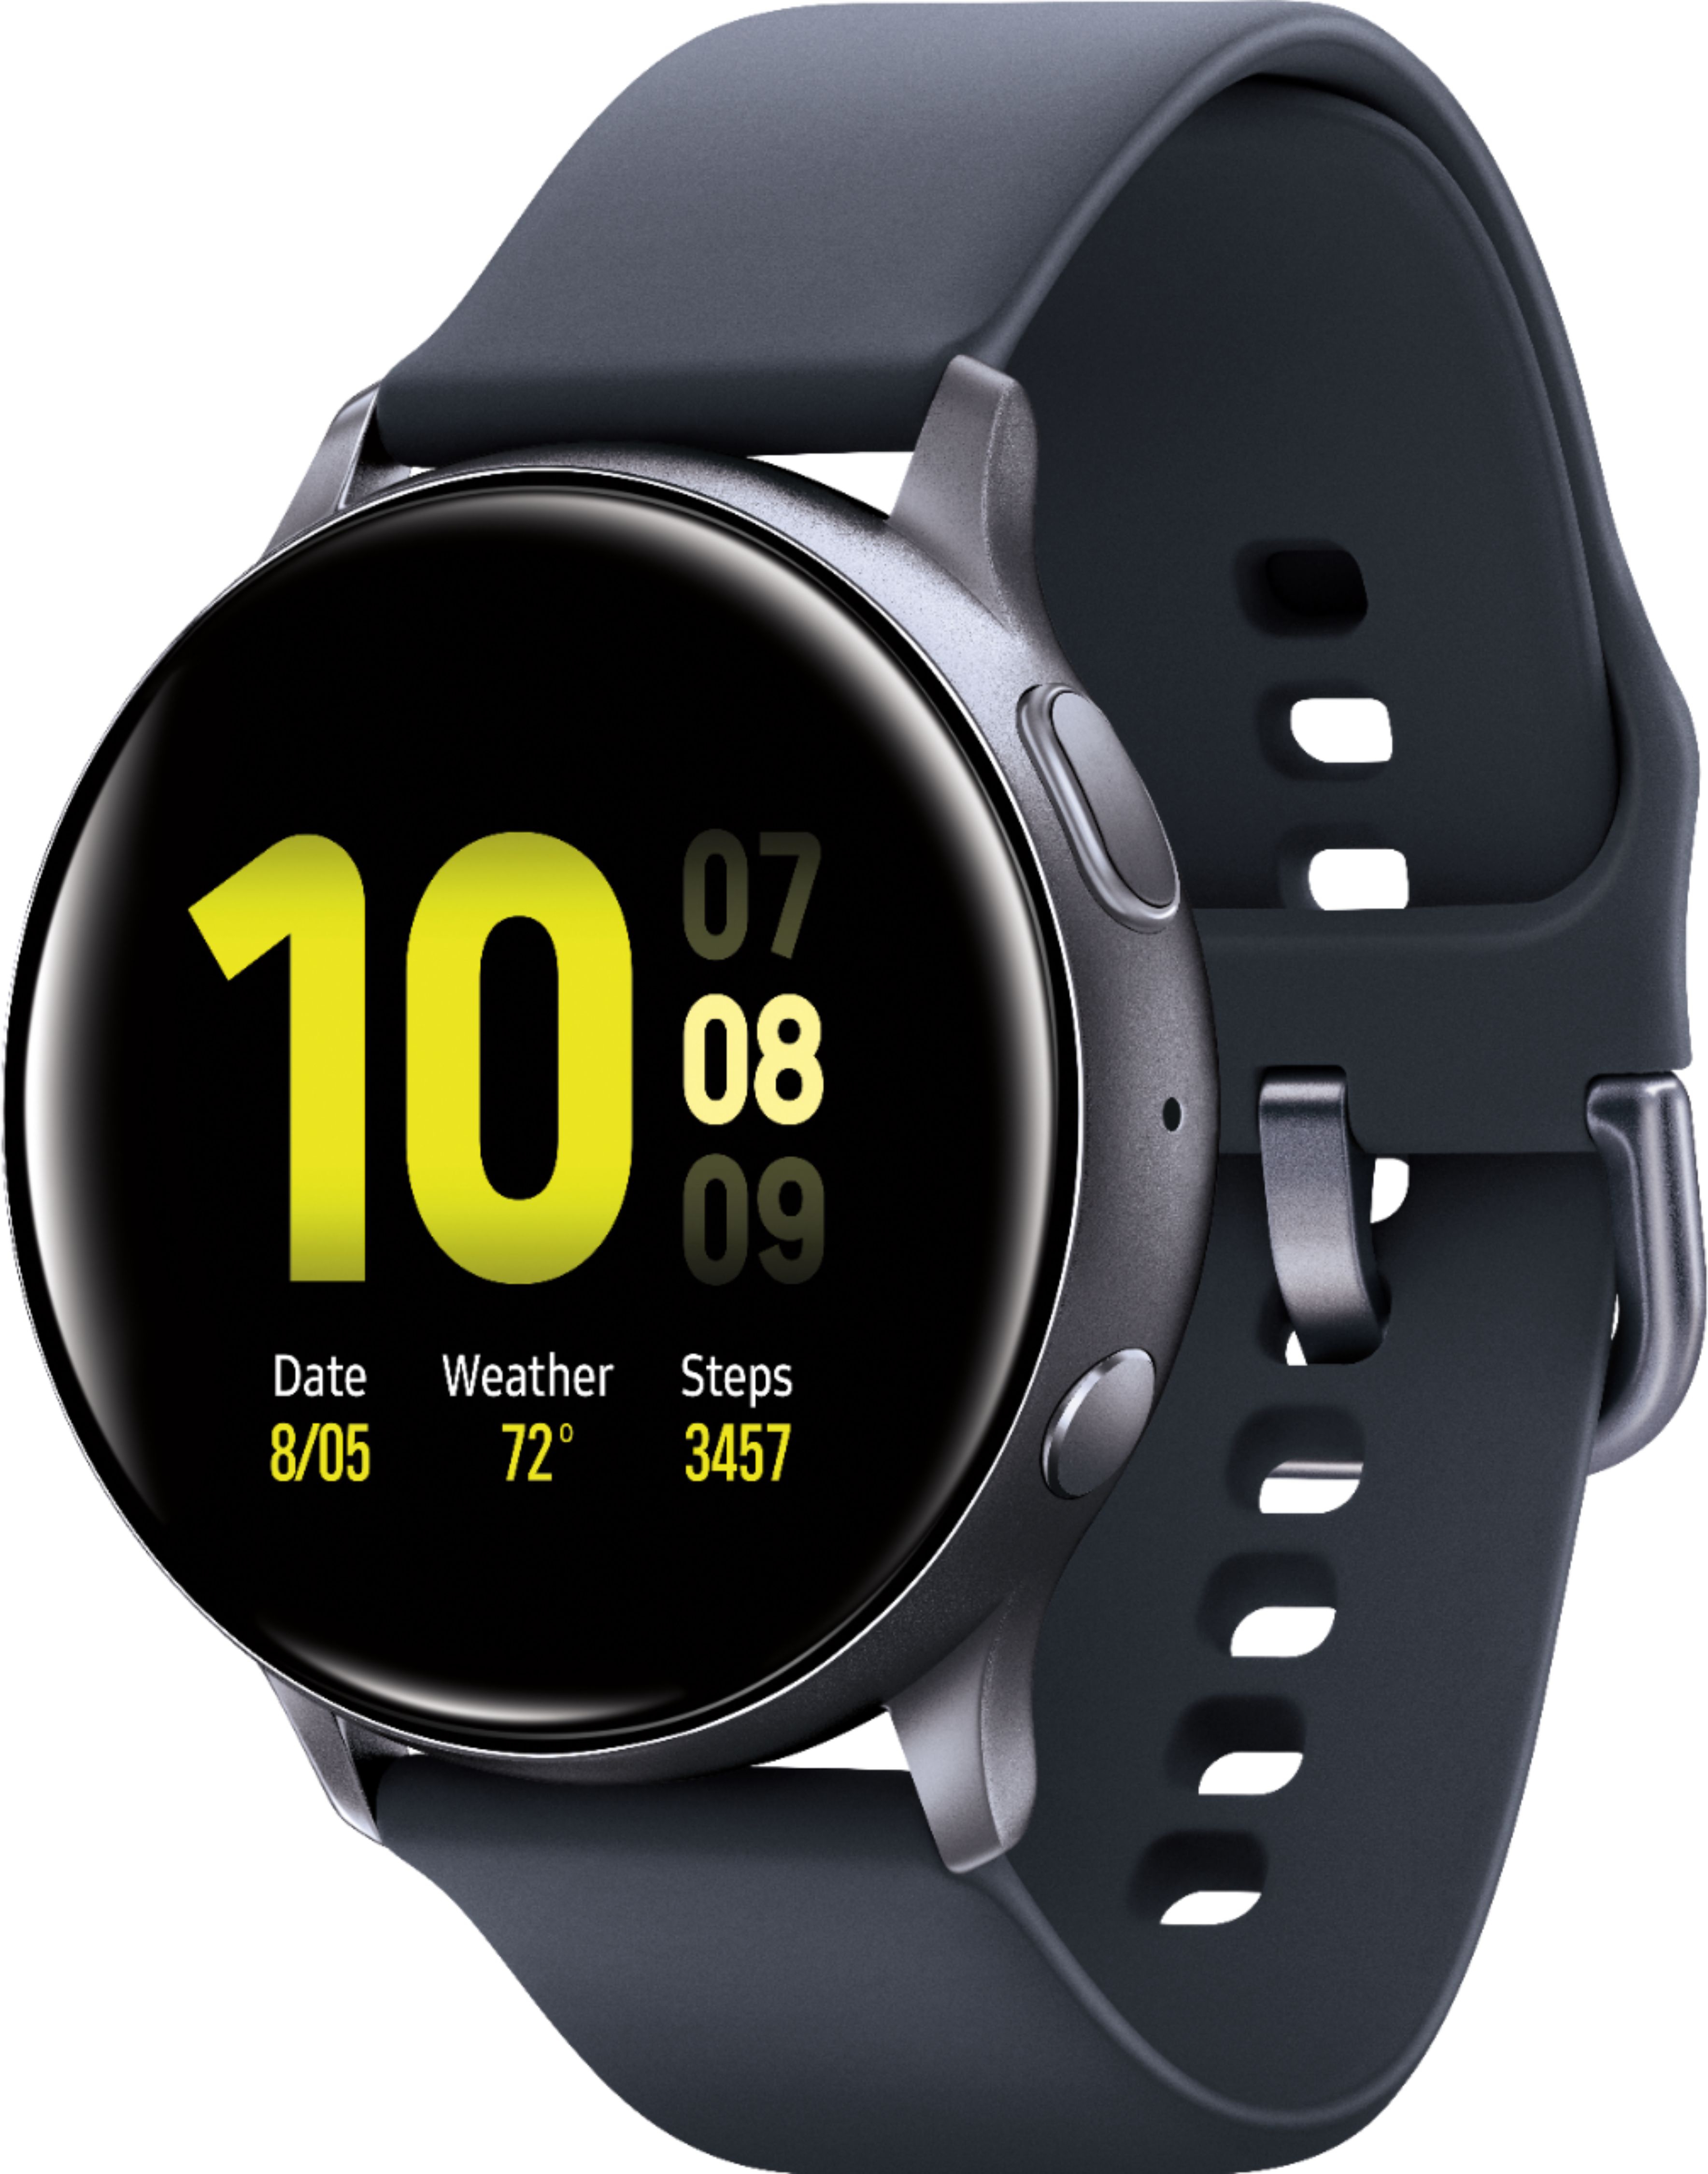 Samsung Galaxy Watch Active 2 Review: A fantastic smartwatch